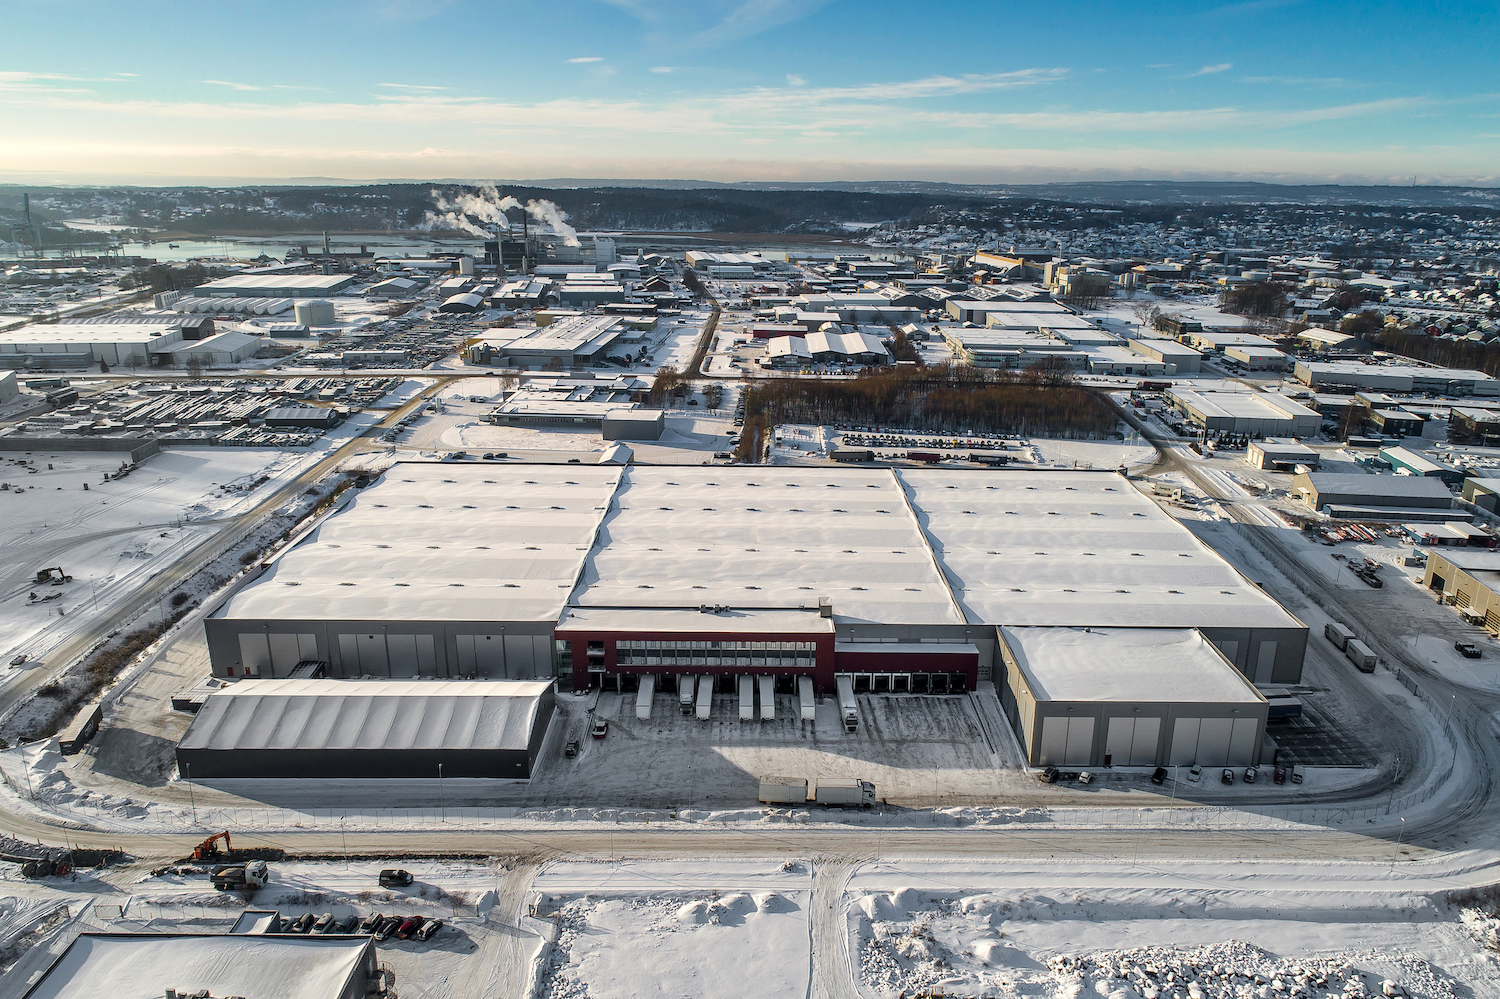 Round Hill Capital announces successful refinancing of its Nordic Logistics and Industrial Real Estate portfolio with new loan facility from a leading global insurance institution delivering value enhancing active asset management initiatives